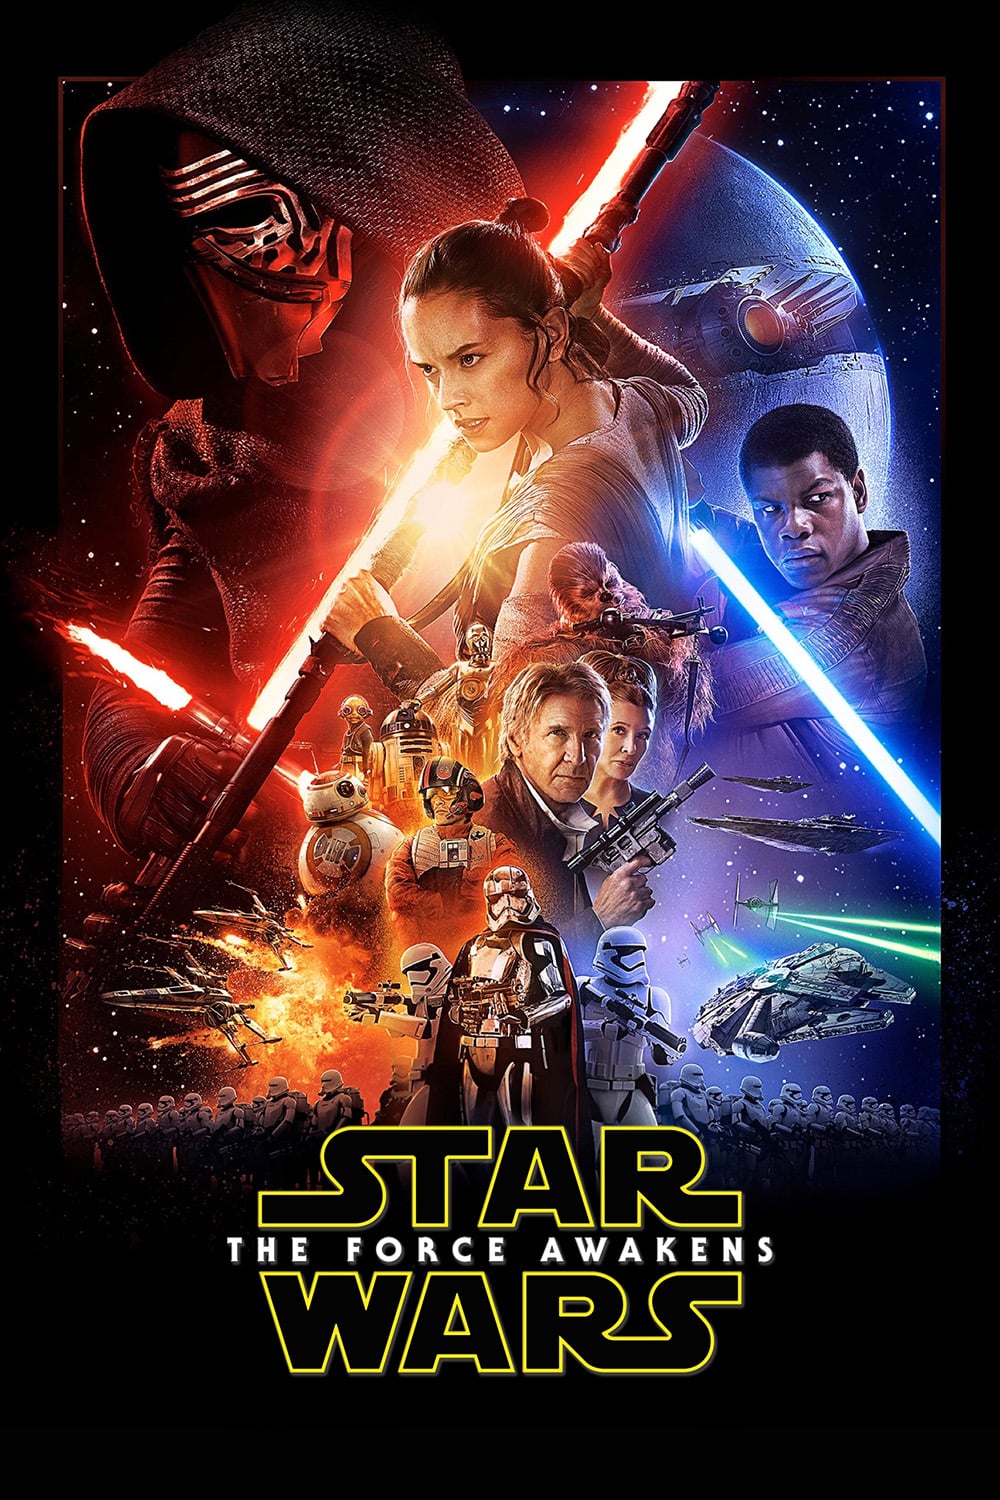 Poster for the movie "Star Wars: The Force Awakens"